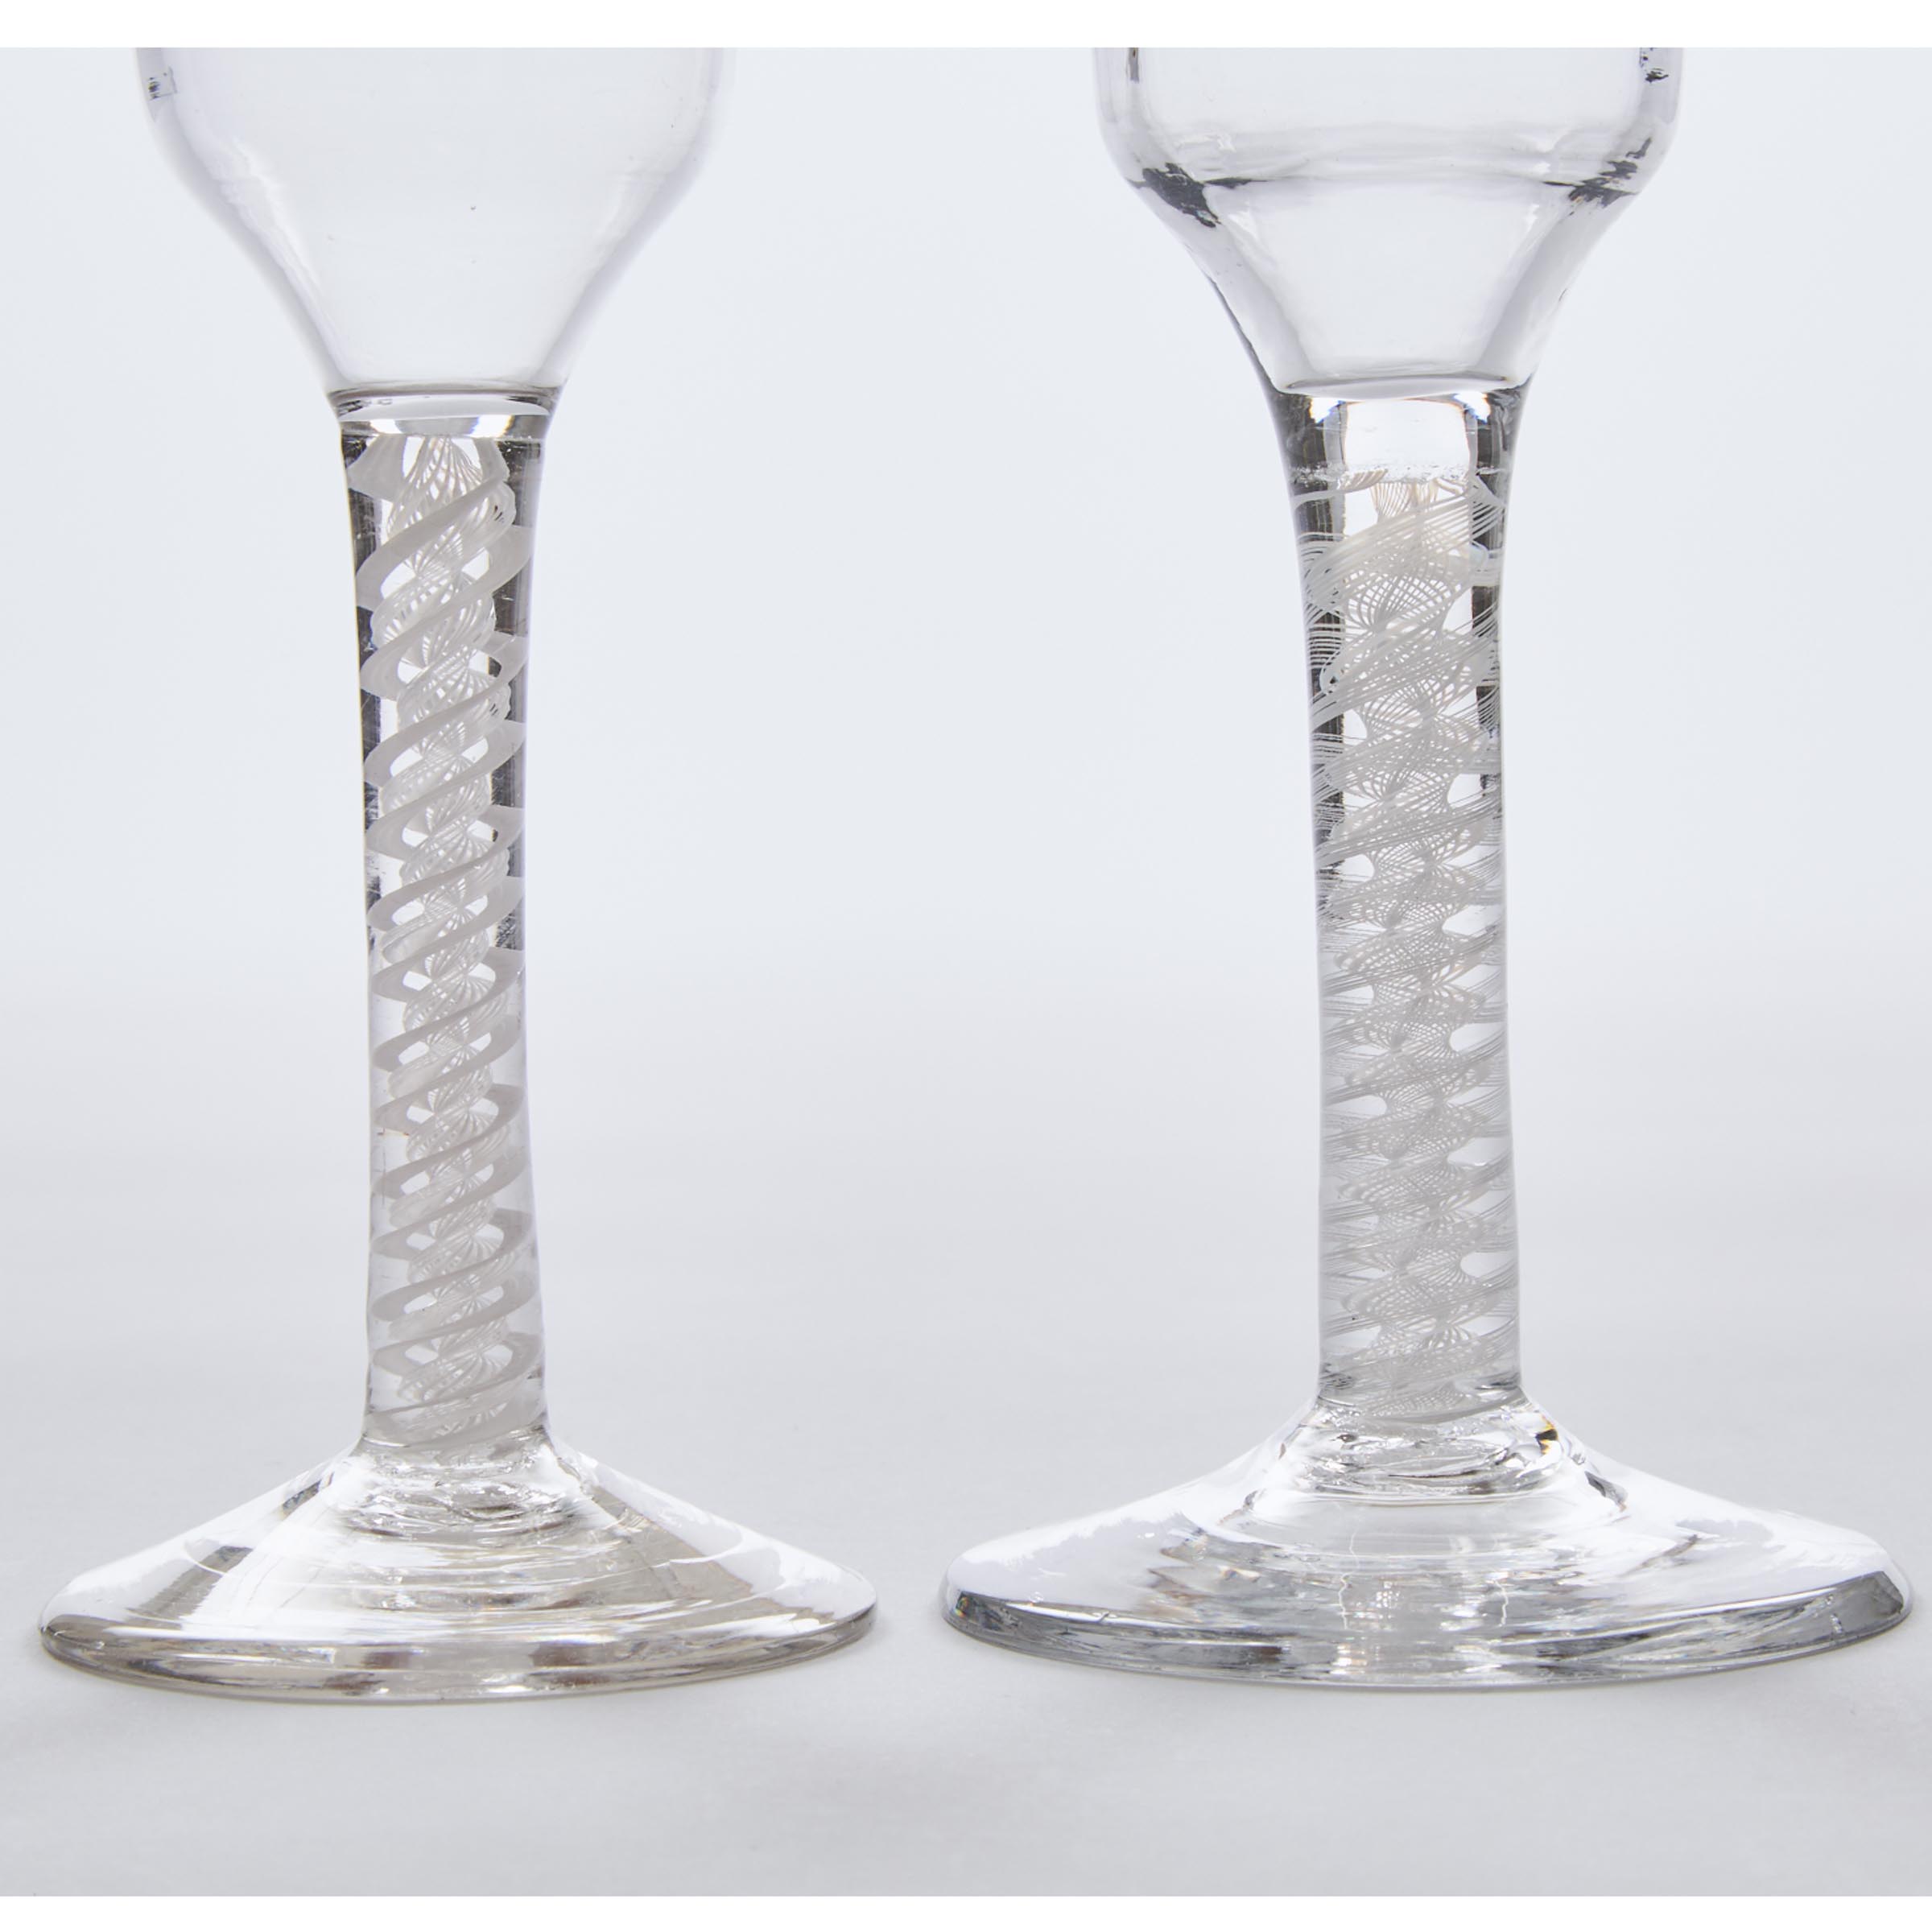 Two English Opaque Twist Stemmed Wine Glasses, c.1760-80